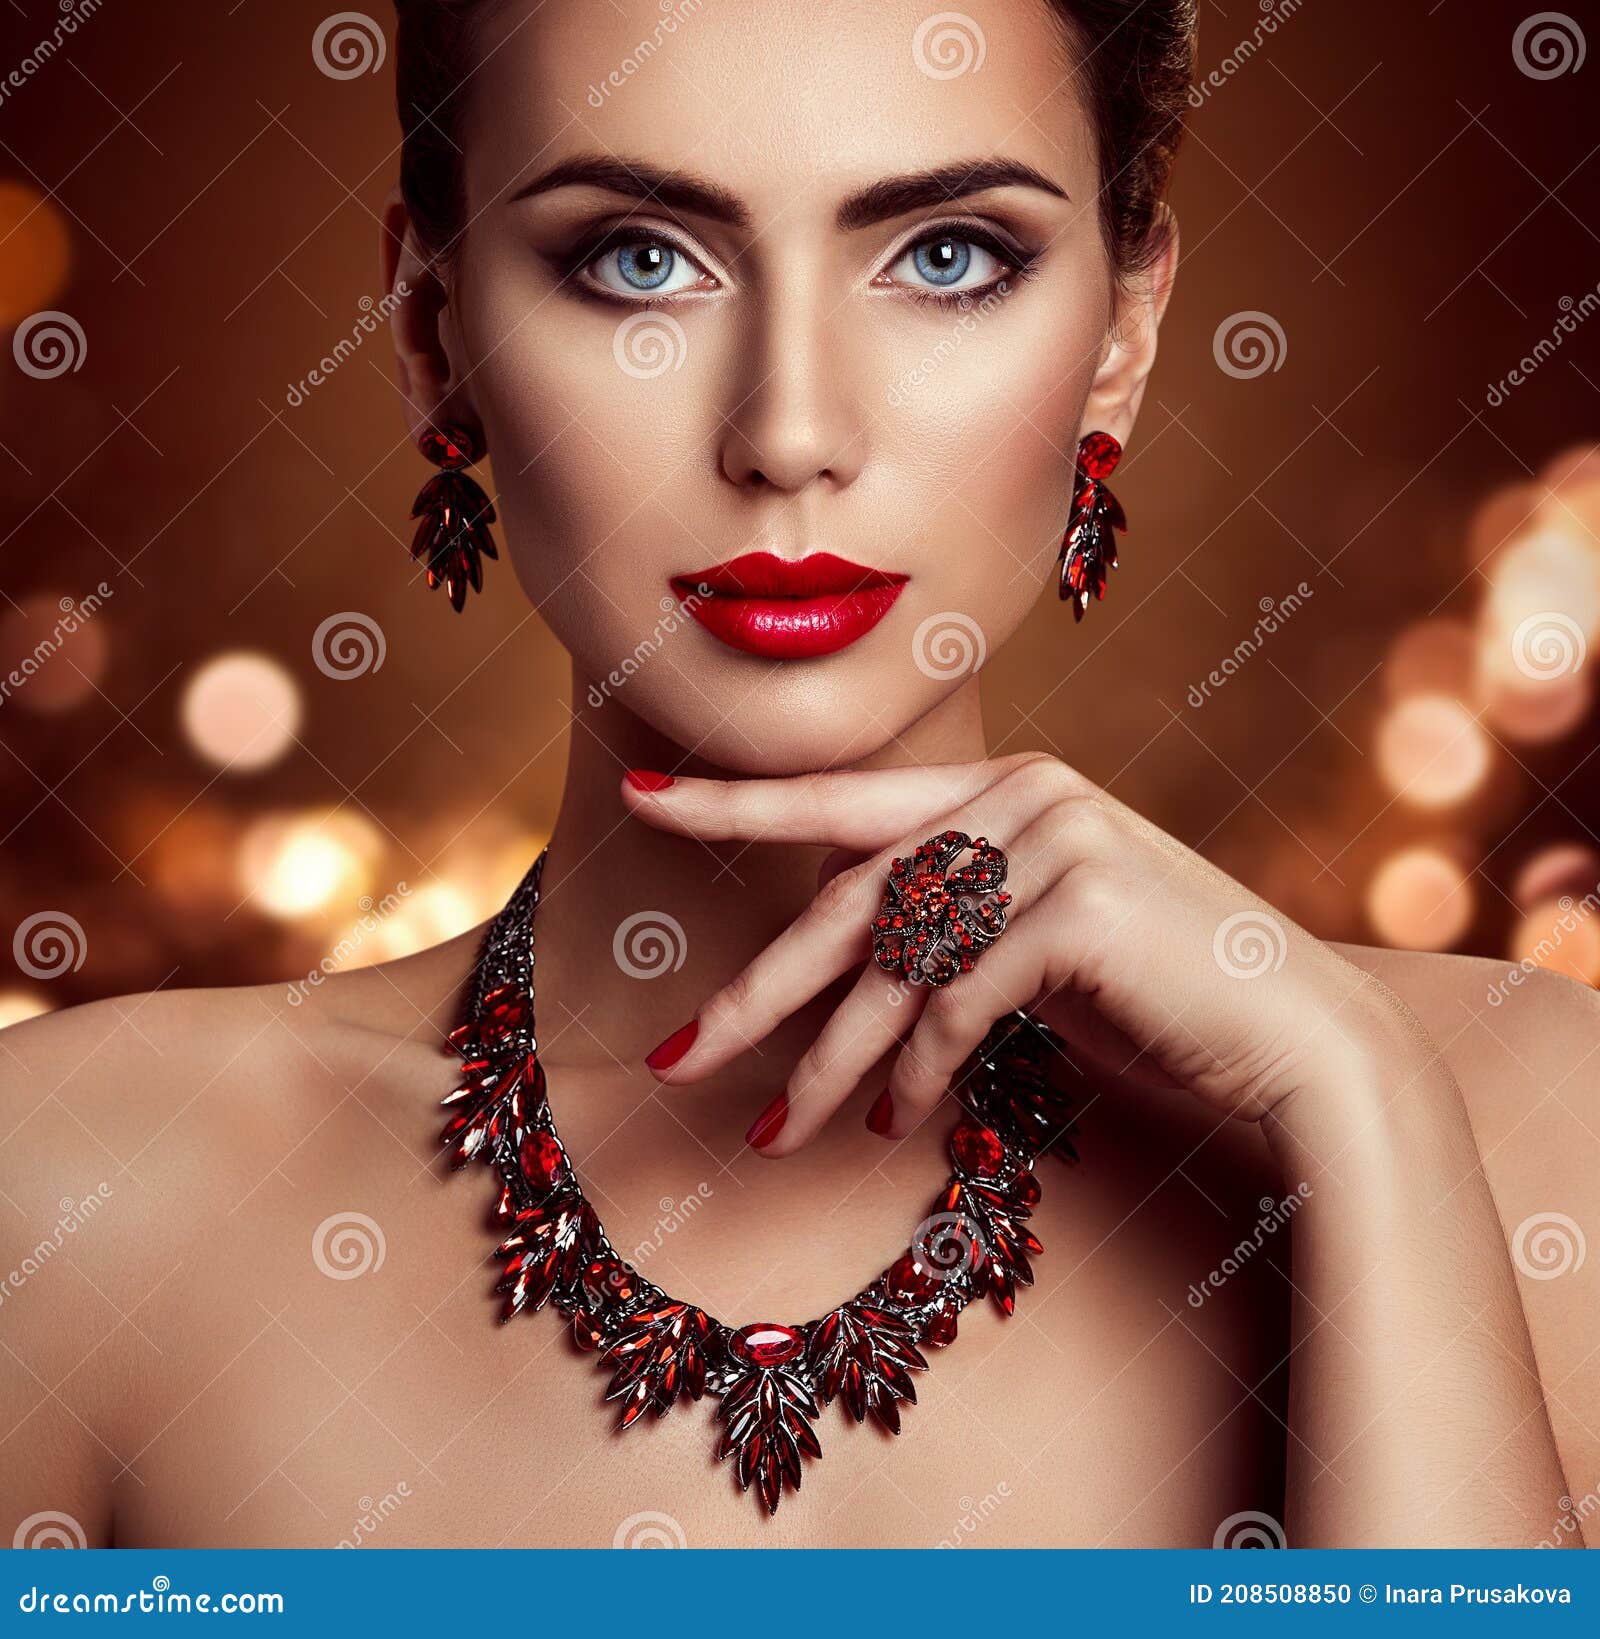 beauty woman face makeup and jewelry, fashion model portrait with jewellery over shining lights background